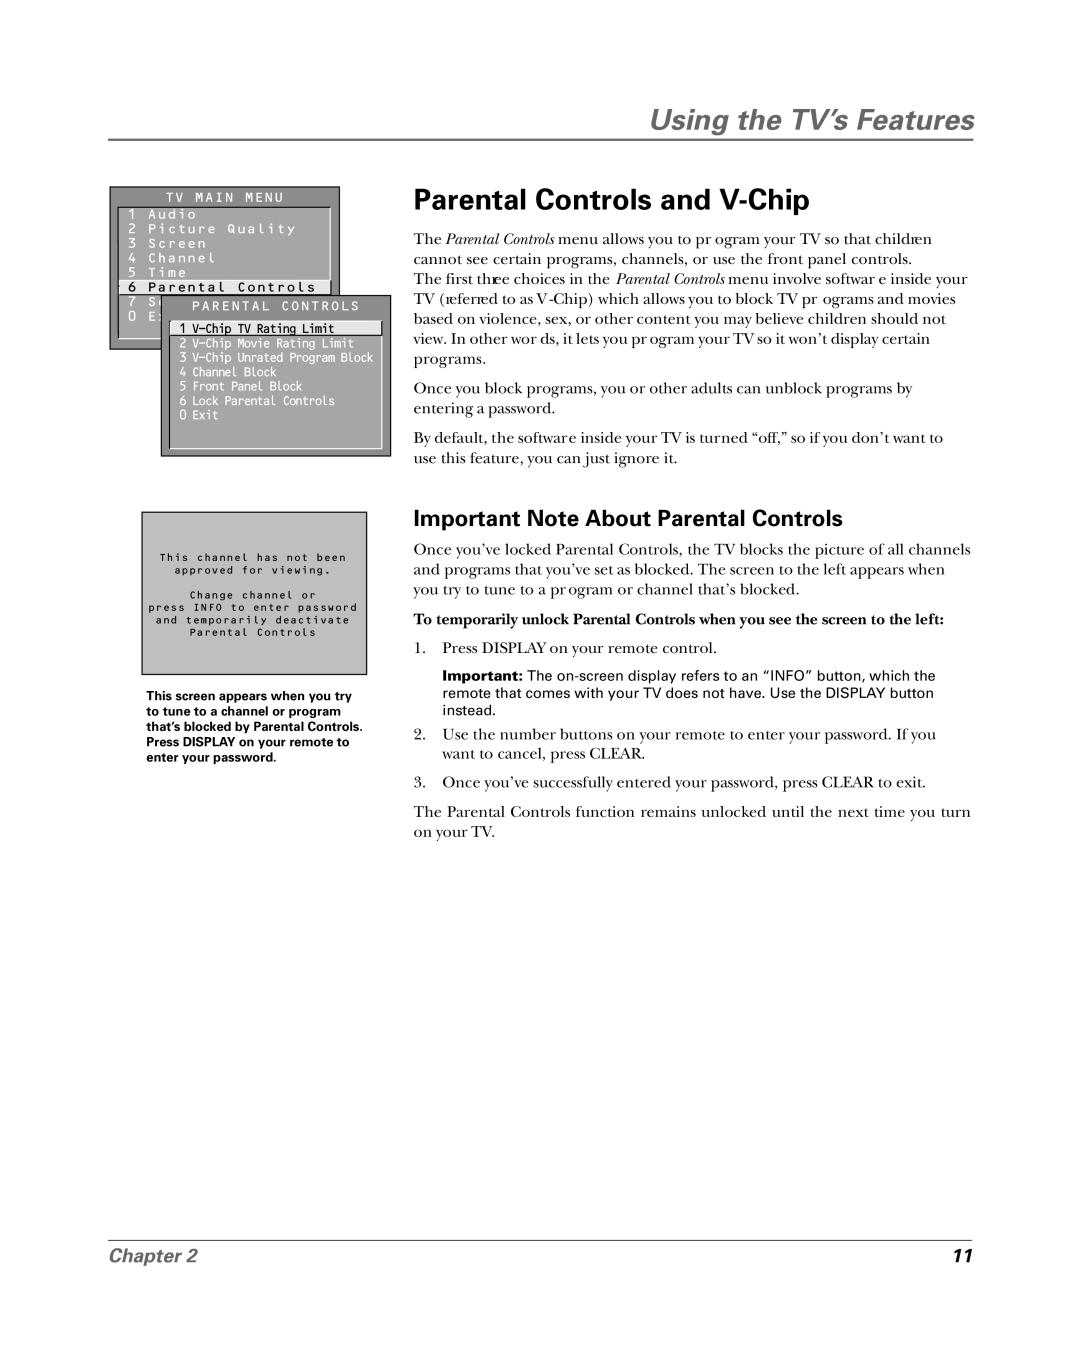 RCA 15956220 manual Parental Controls and V-Chip, Important Note About Parental Controls, Using the TV’s Features, Chapter 